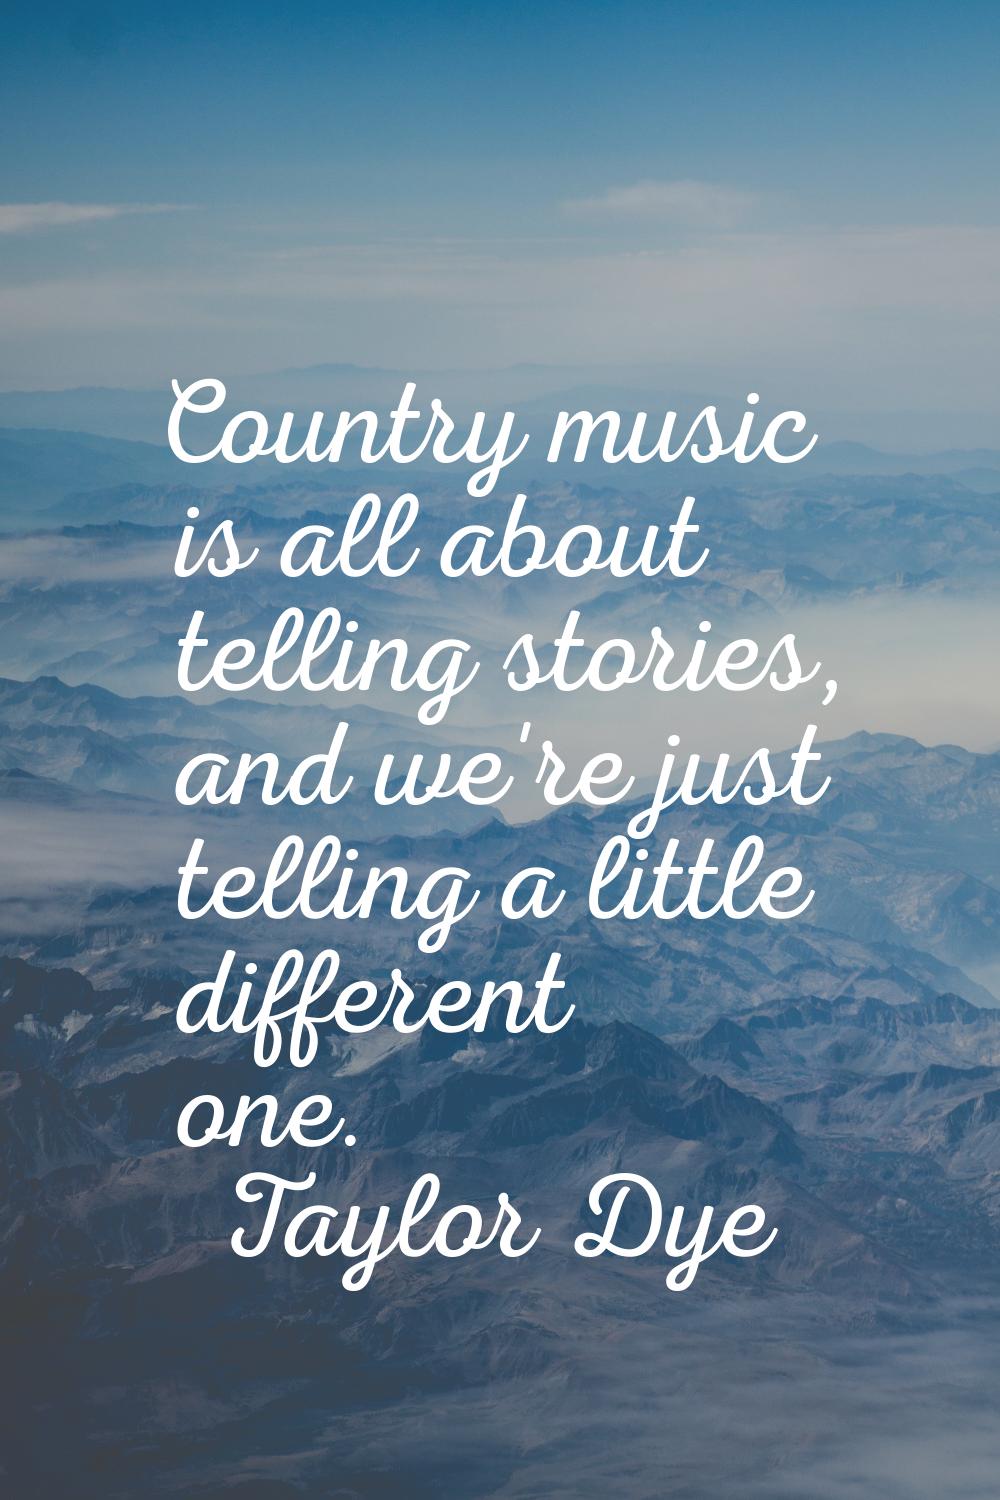 Country music is all about telling stories, and we're just telling a little different one.